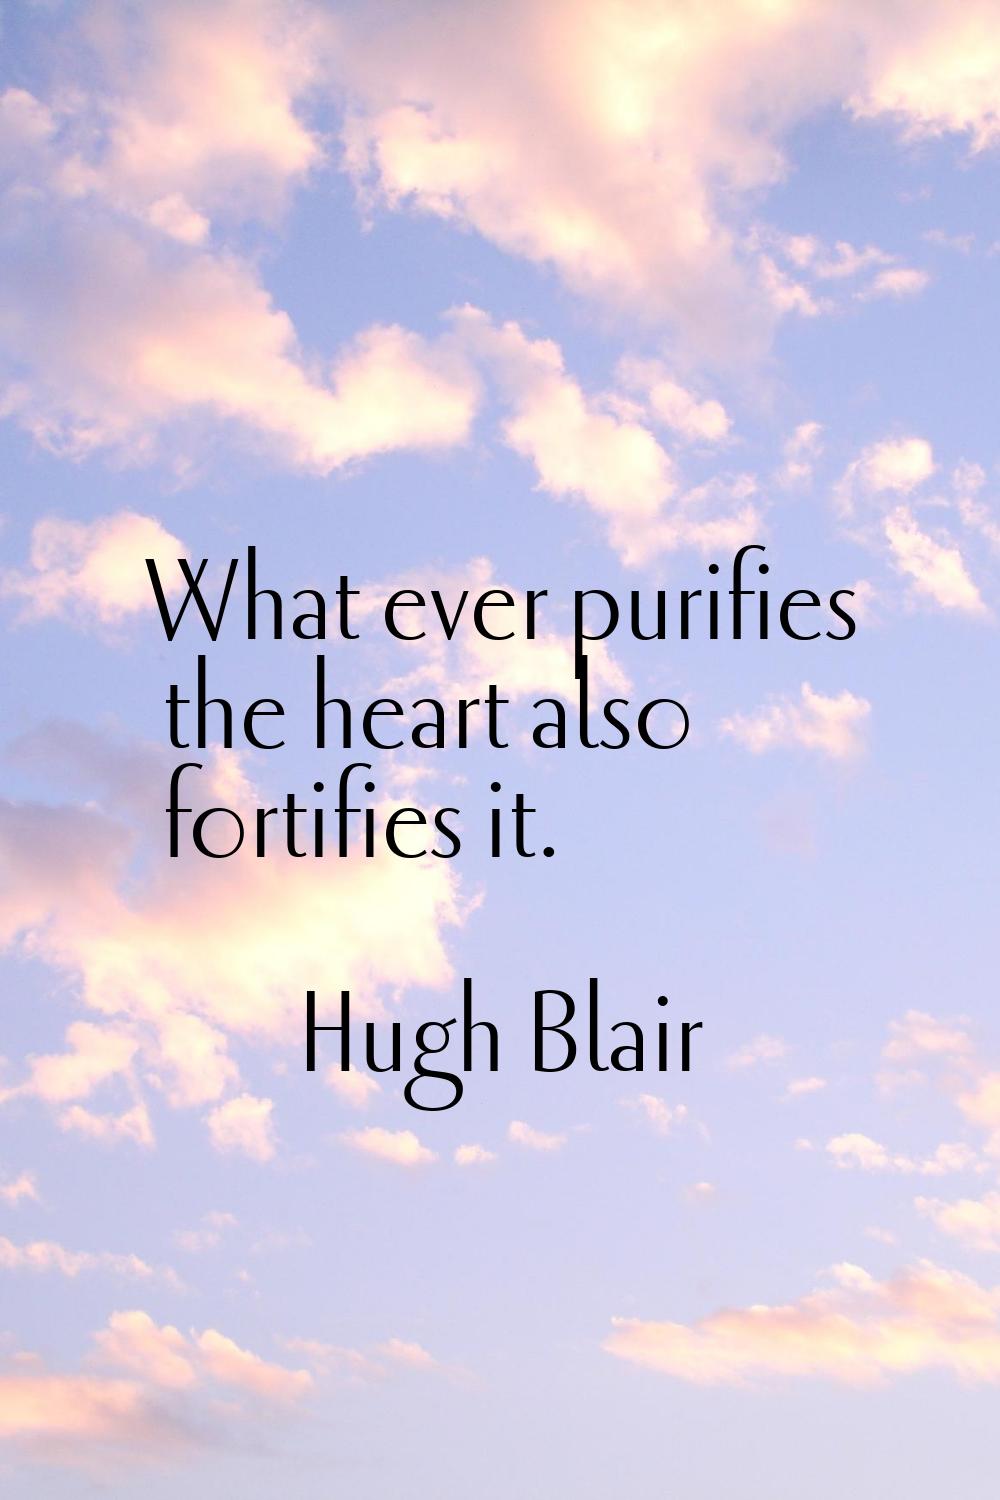 What ever purifies the heart also fortifies it.